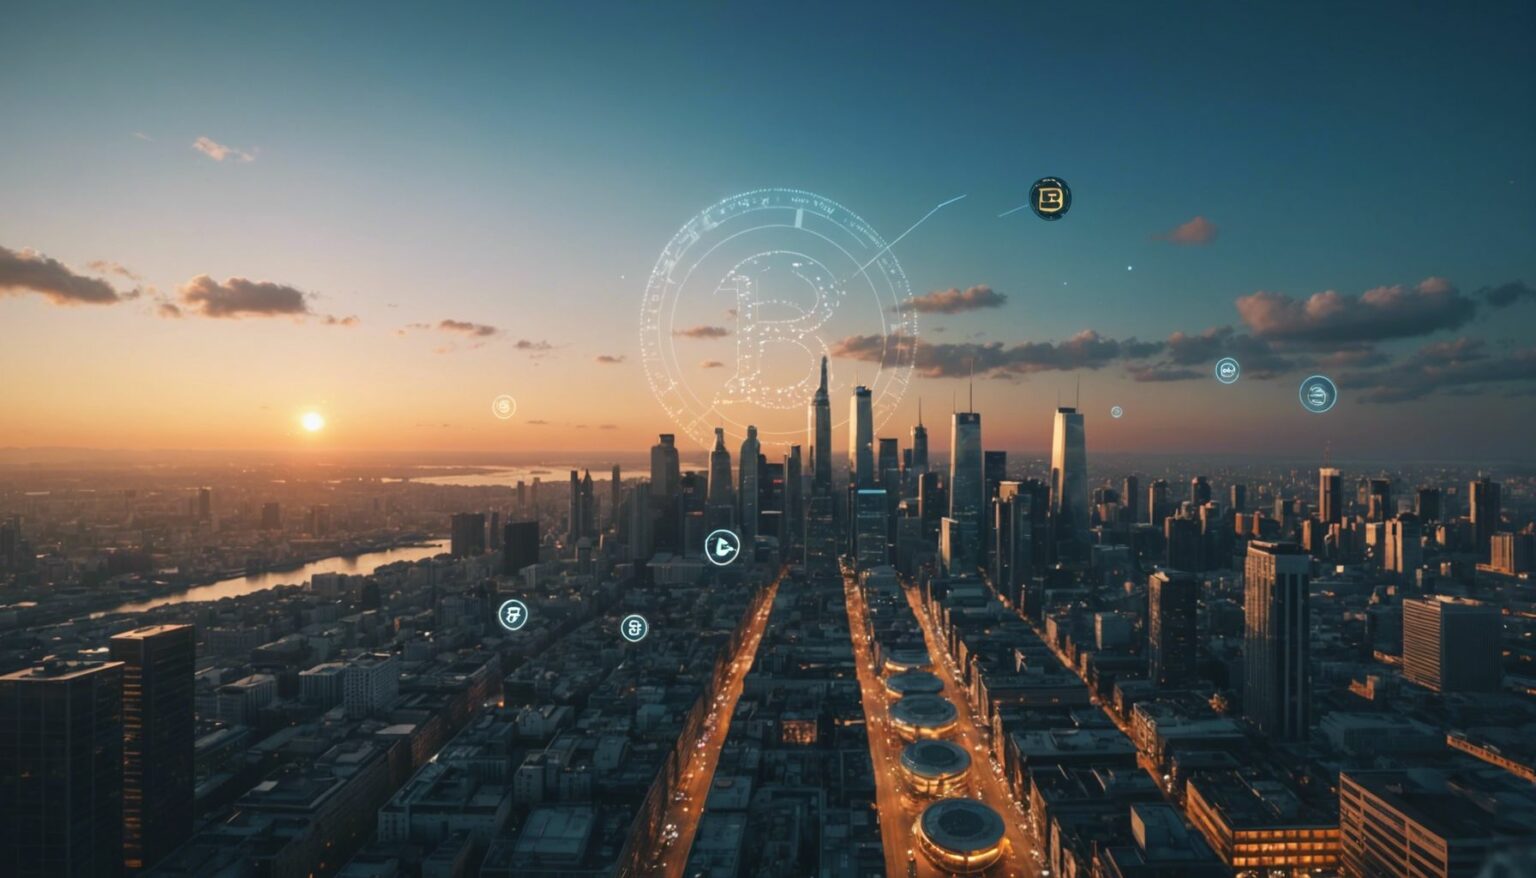 Futuristic city with digital currency symbols, highlighting upcoming crypto projects to watch in 2023.